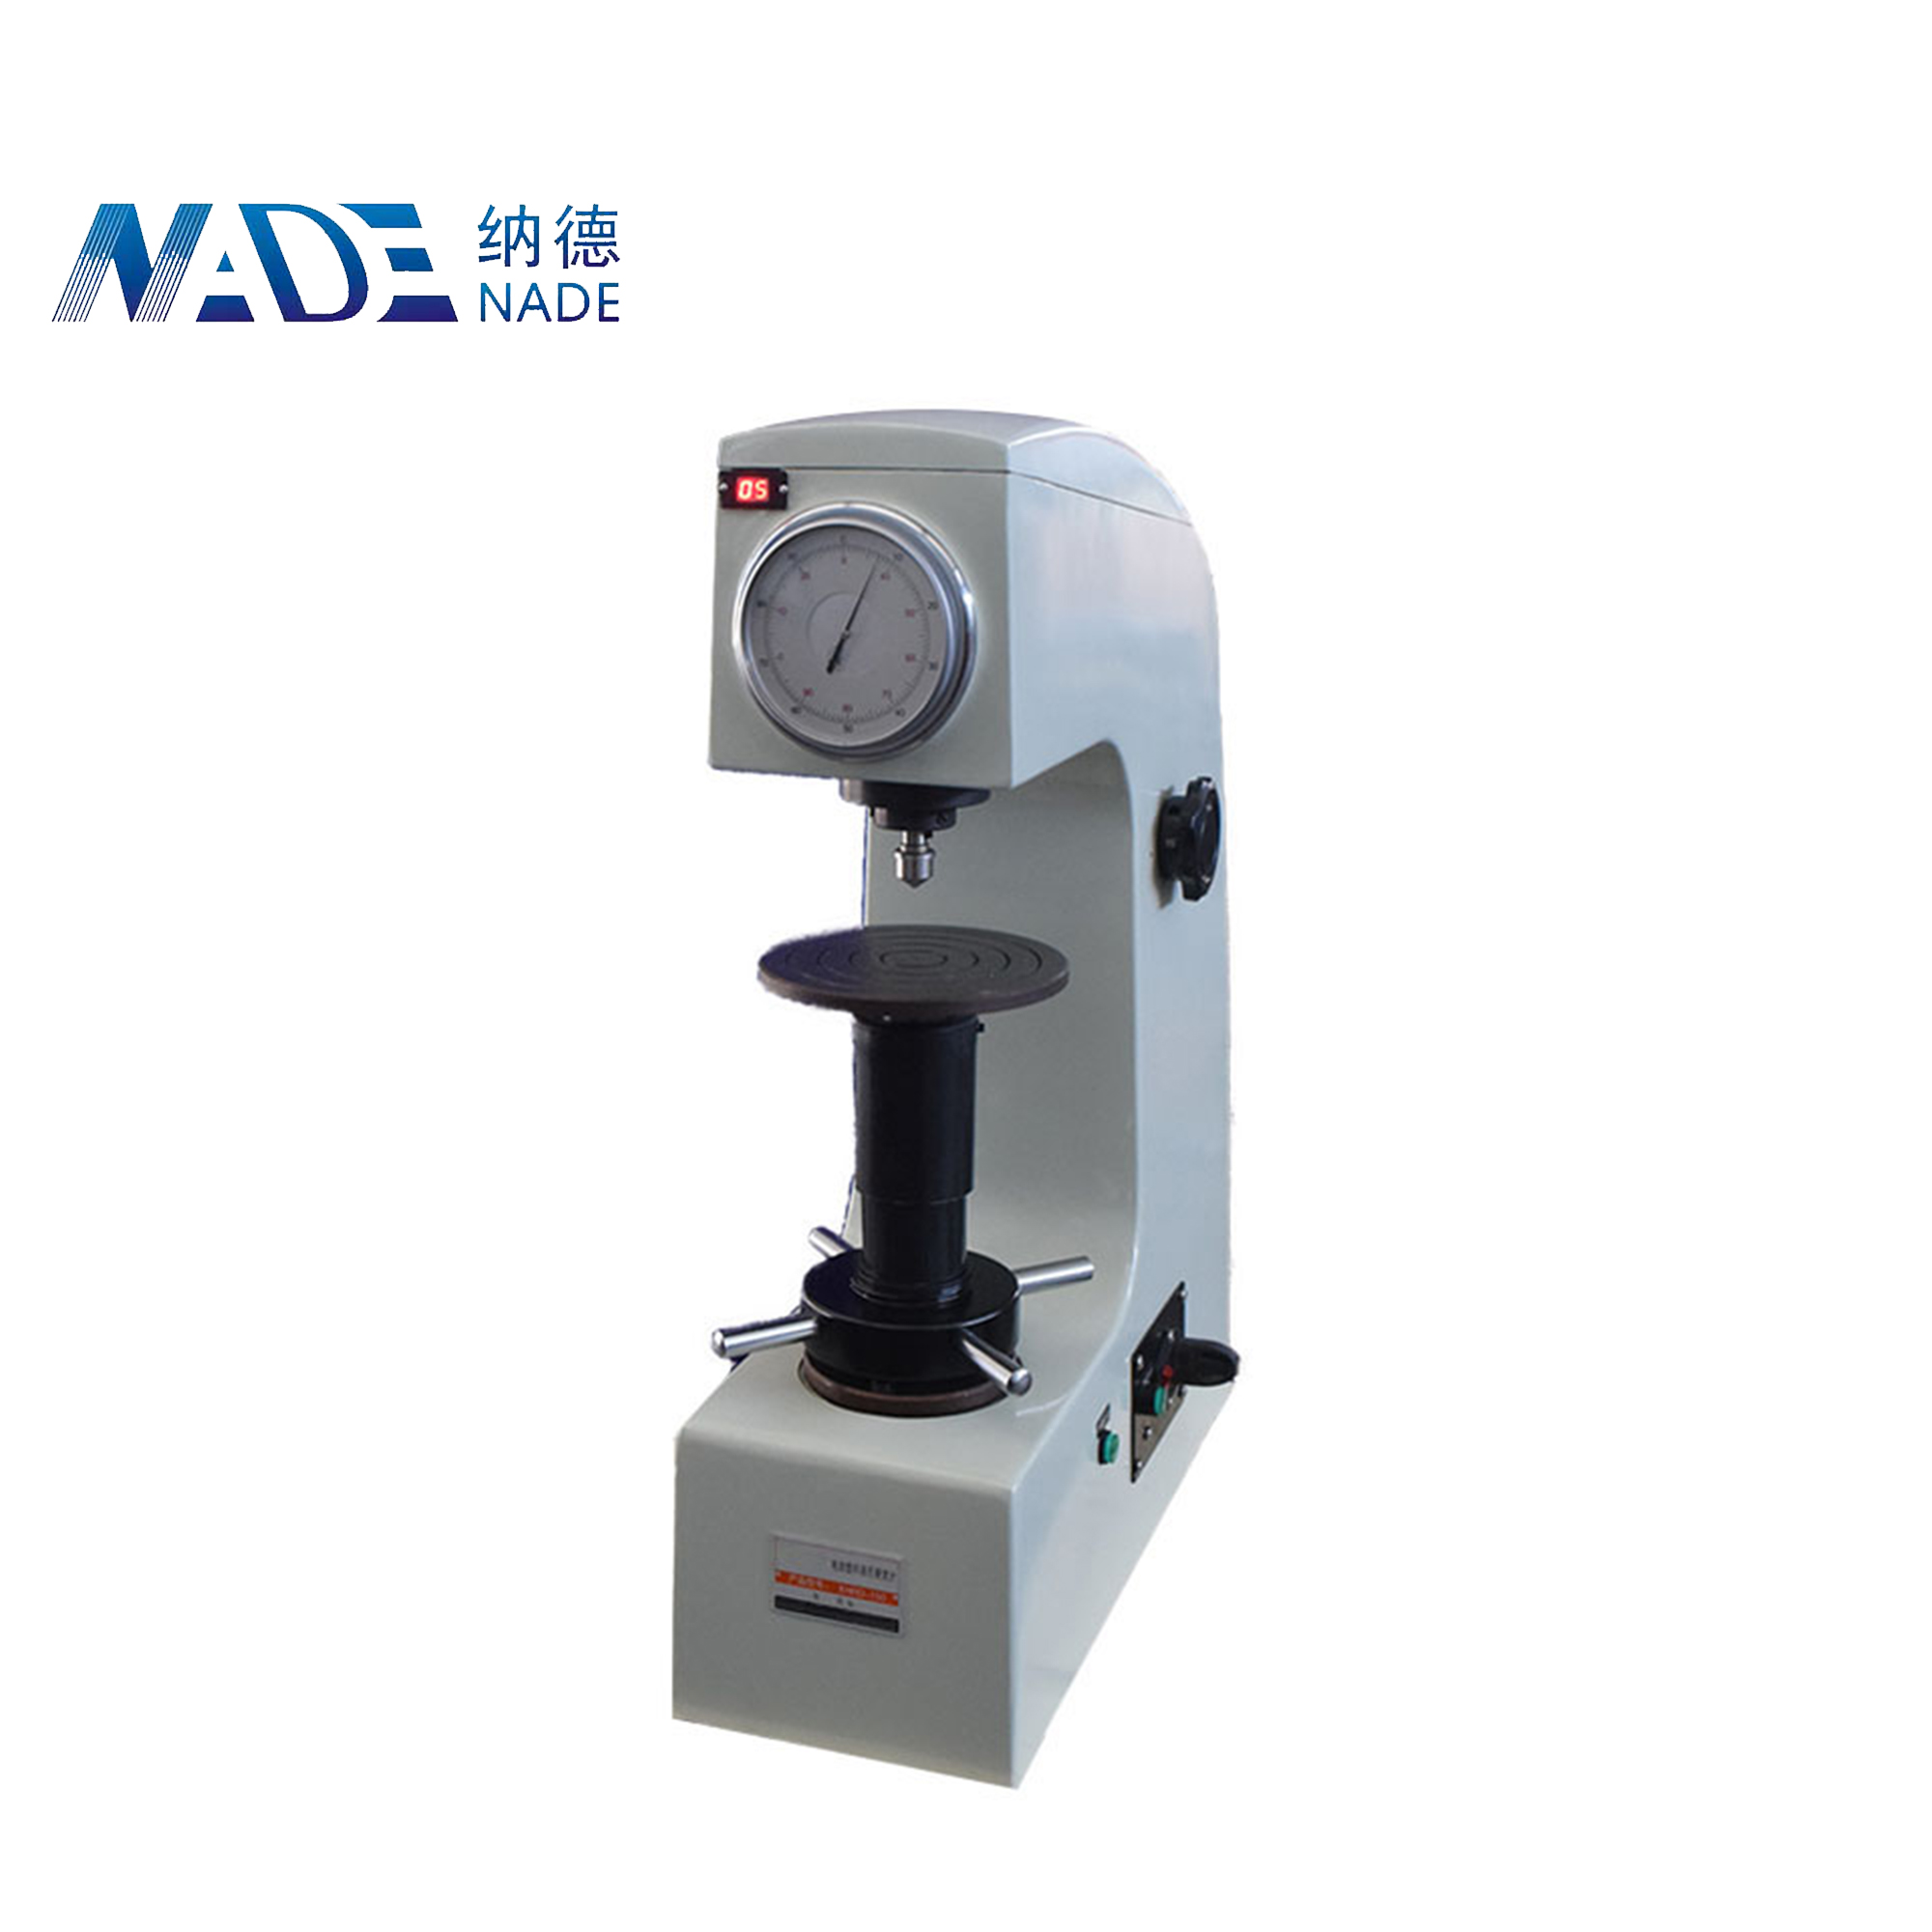 NADE HRD-45 Motorized Superficial Rockwell hardness tester Price for ferrous metals, alloy steel, carbide